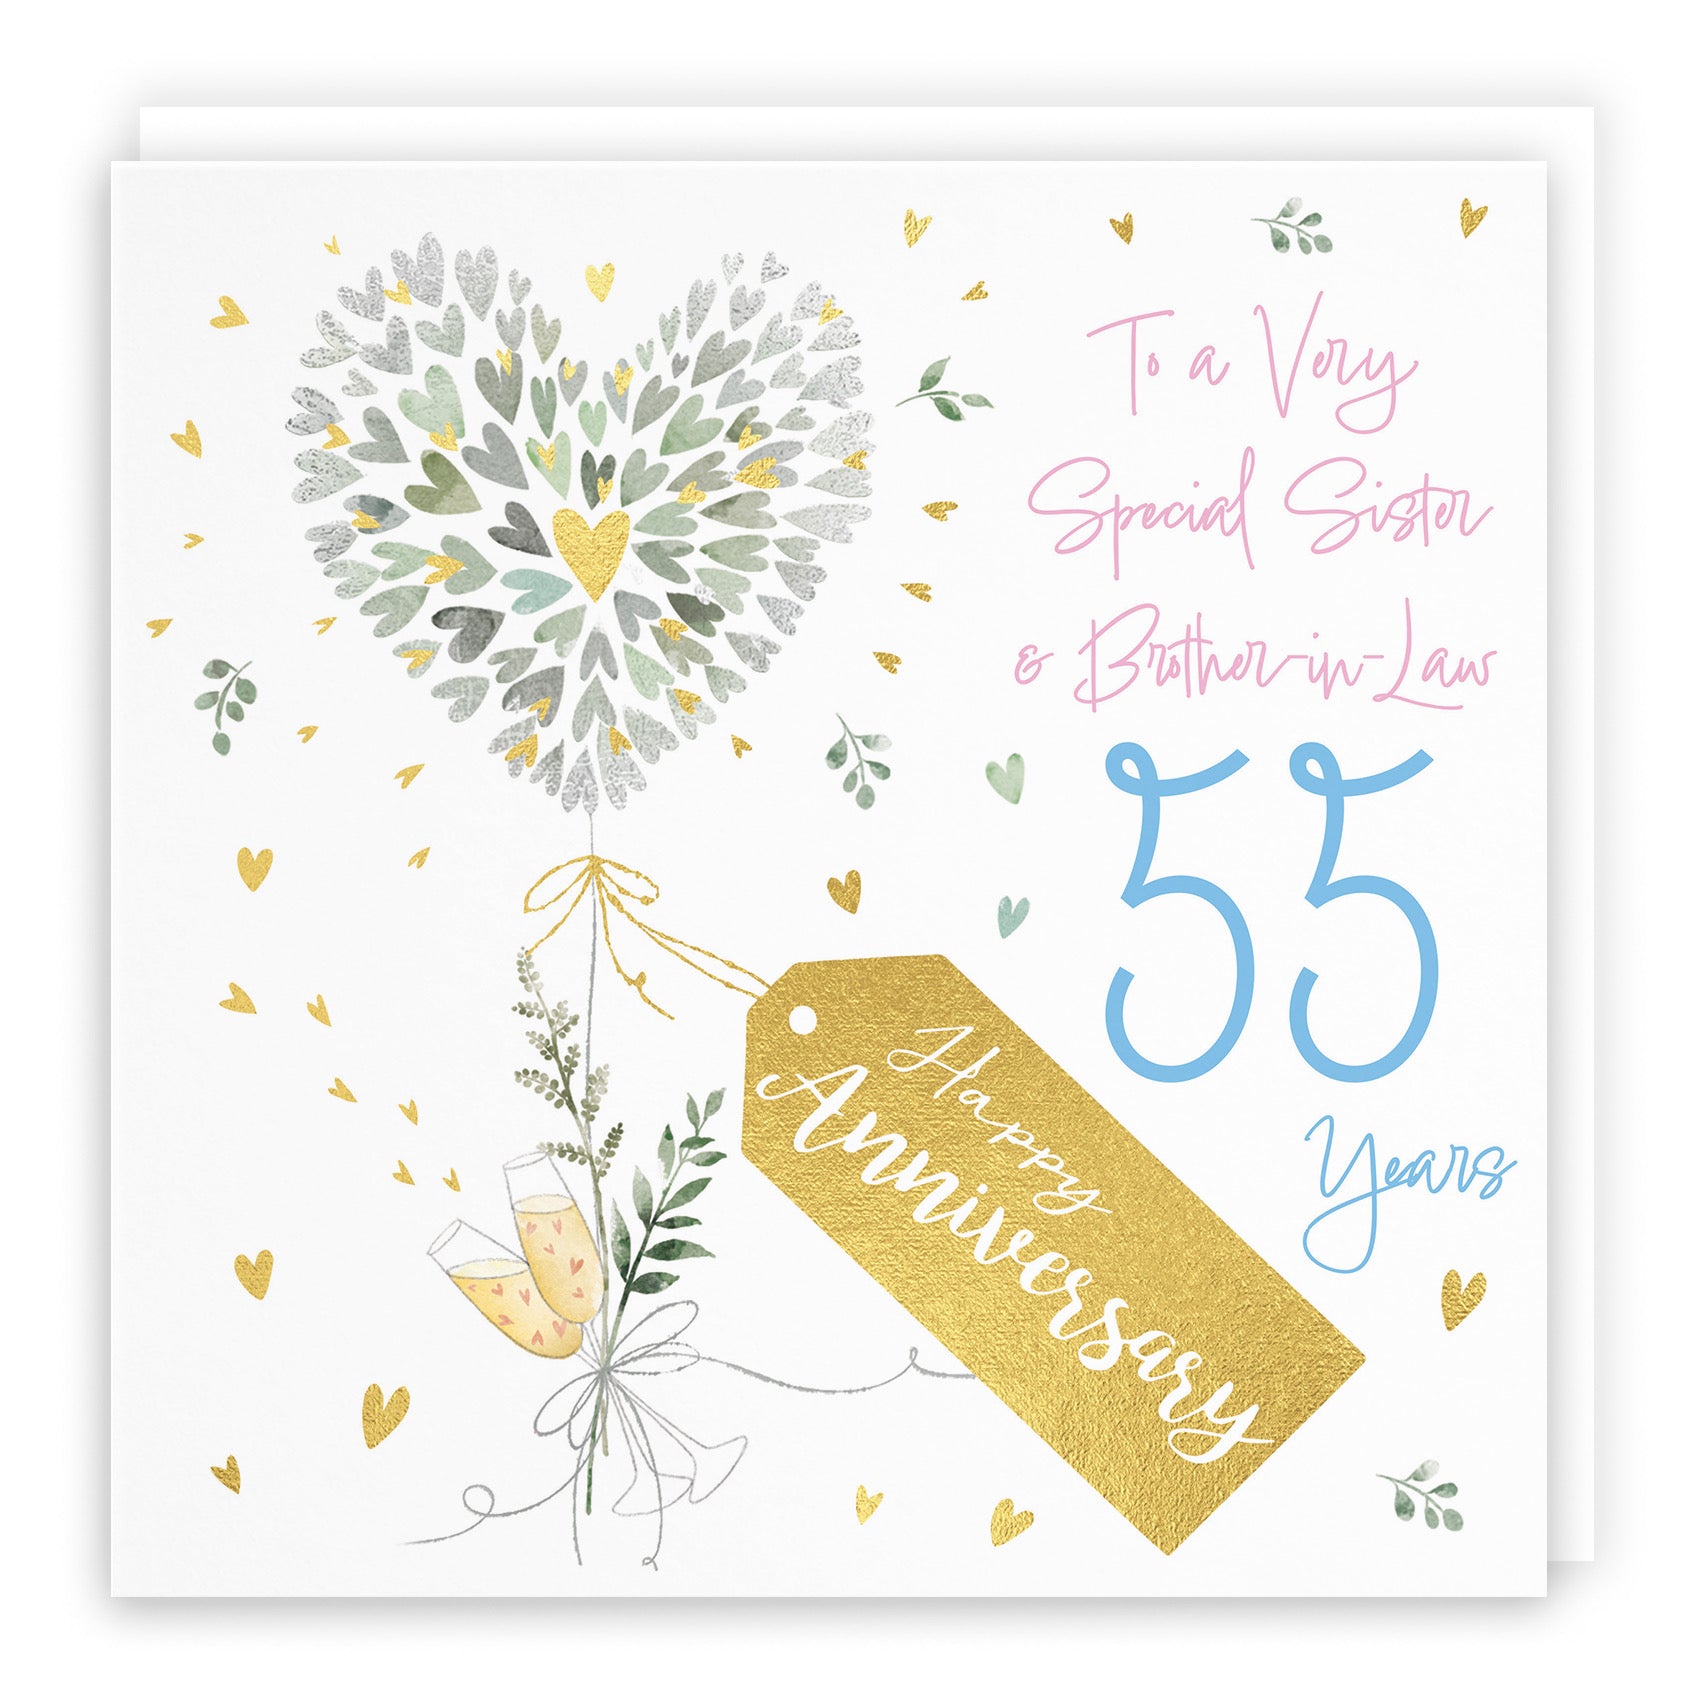 Sister And Brother-in-Law 55th Anniversary Card Contemporary Hearts Milo's Gallery - Default Title (B0CKJ5BR52)